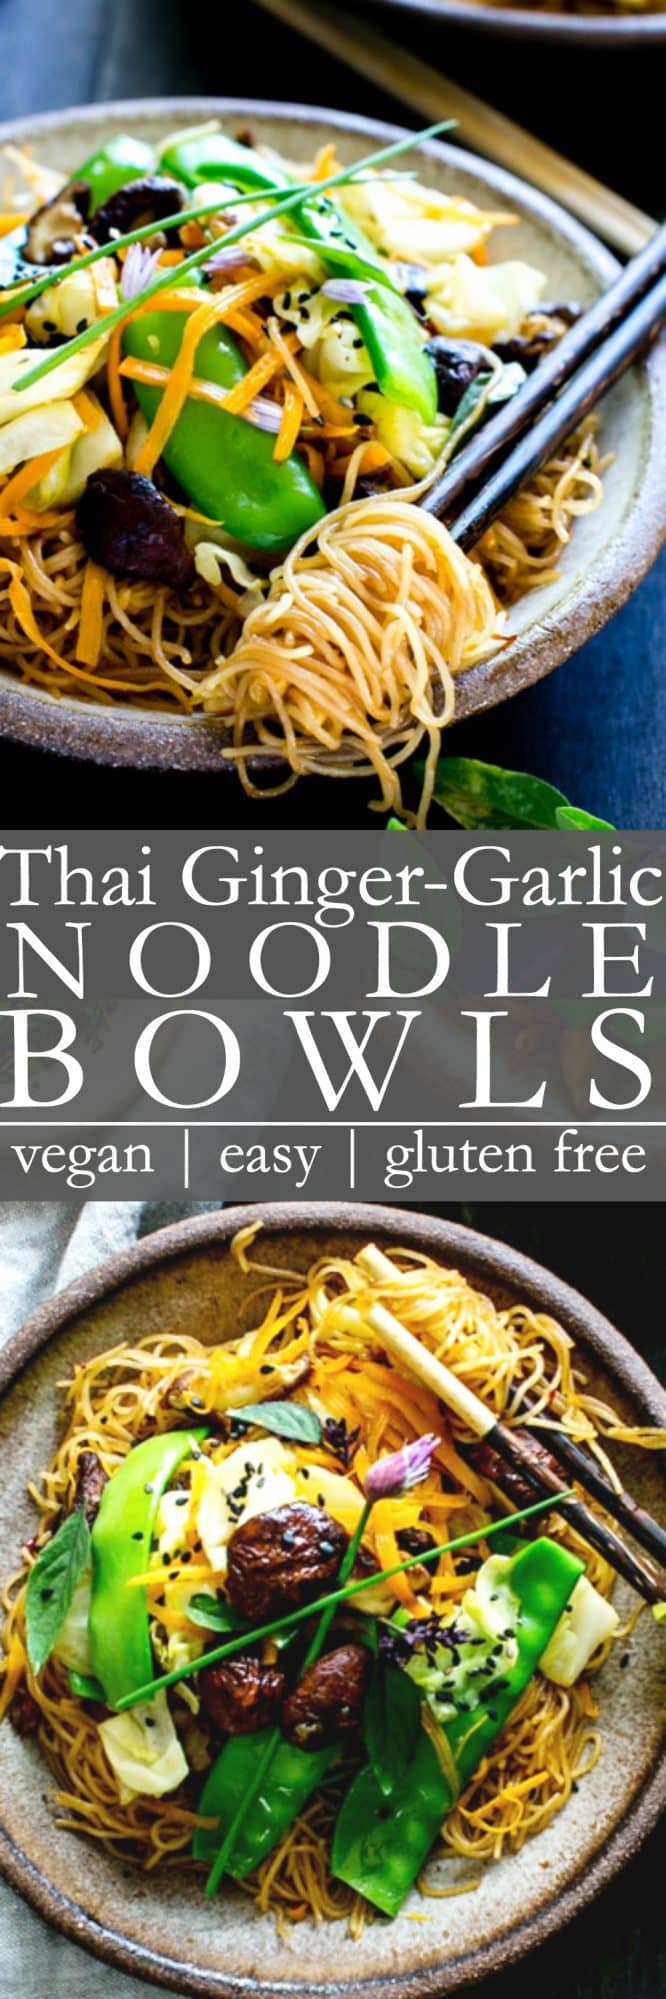 Thai Ginger and Garlic Noodle Bowls is a flavor packed stir fry recipe loaded with veggies swimming in a umami filled sauce. 